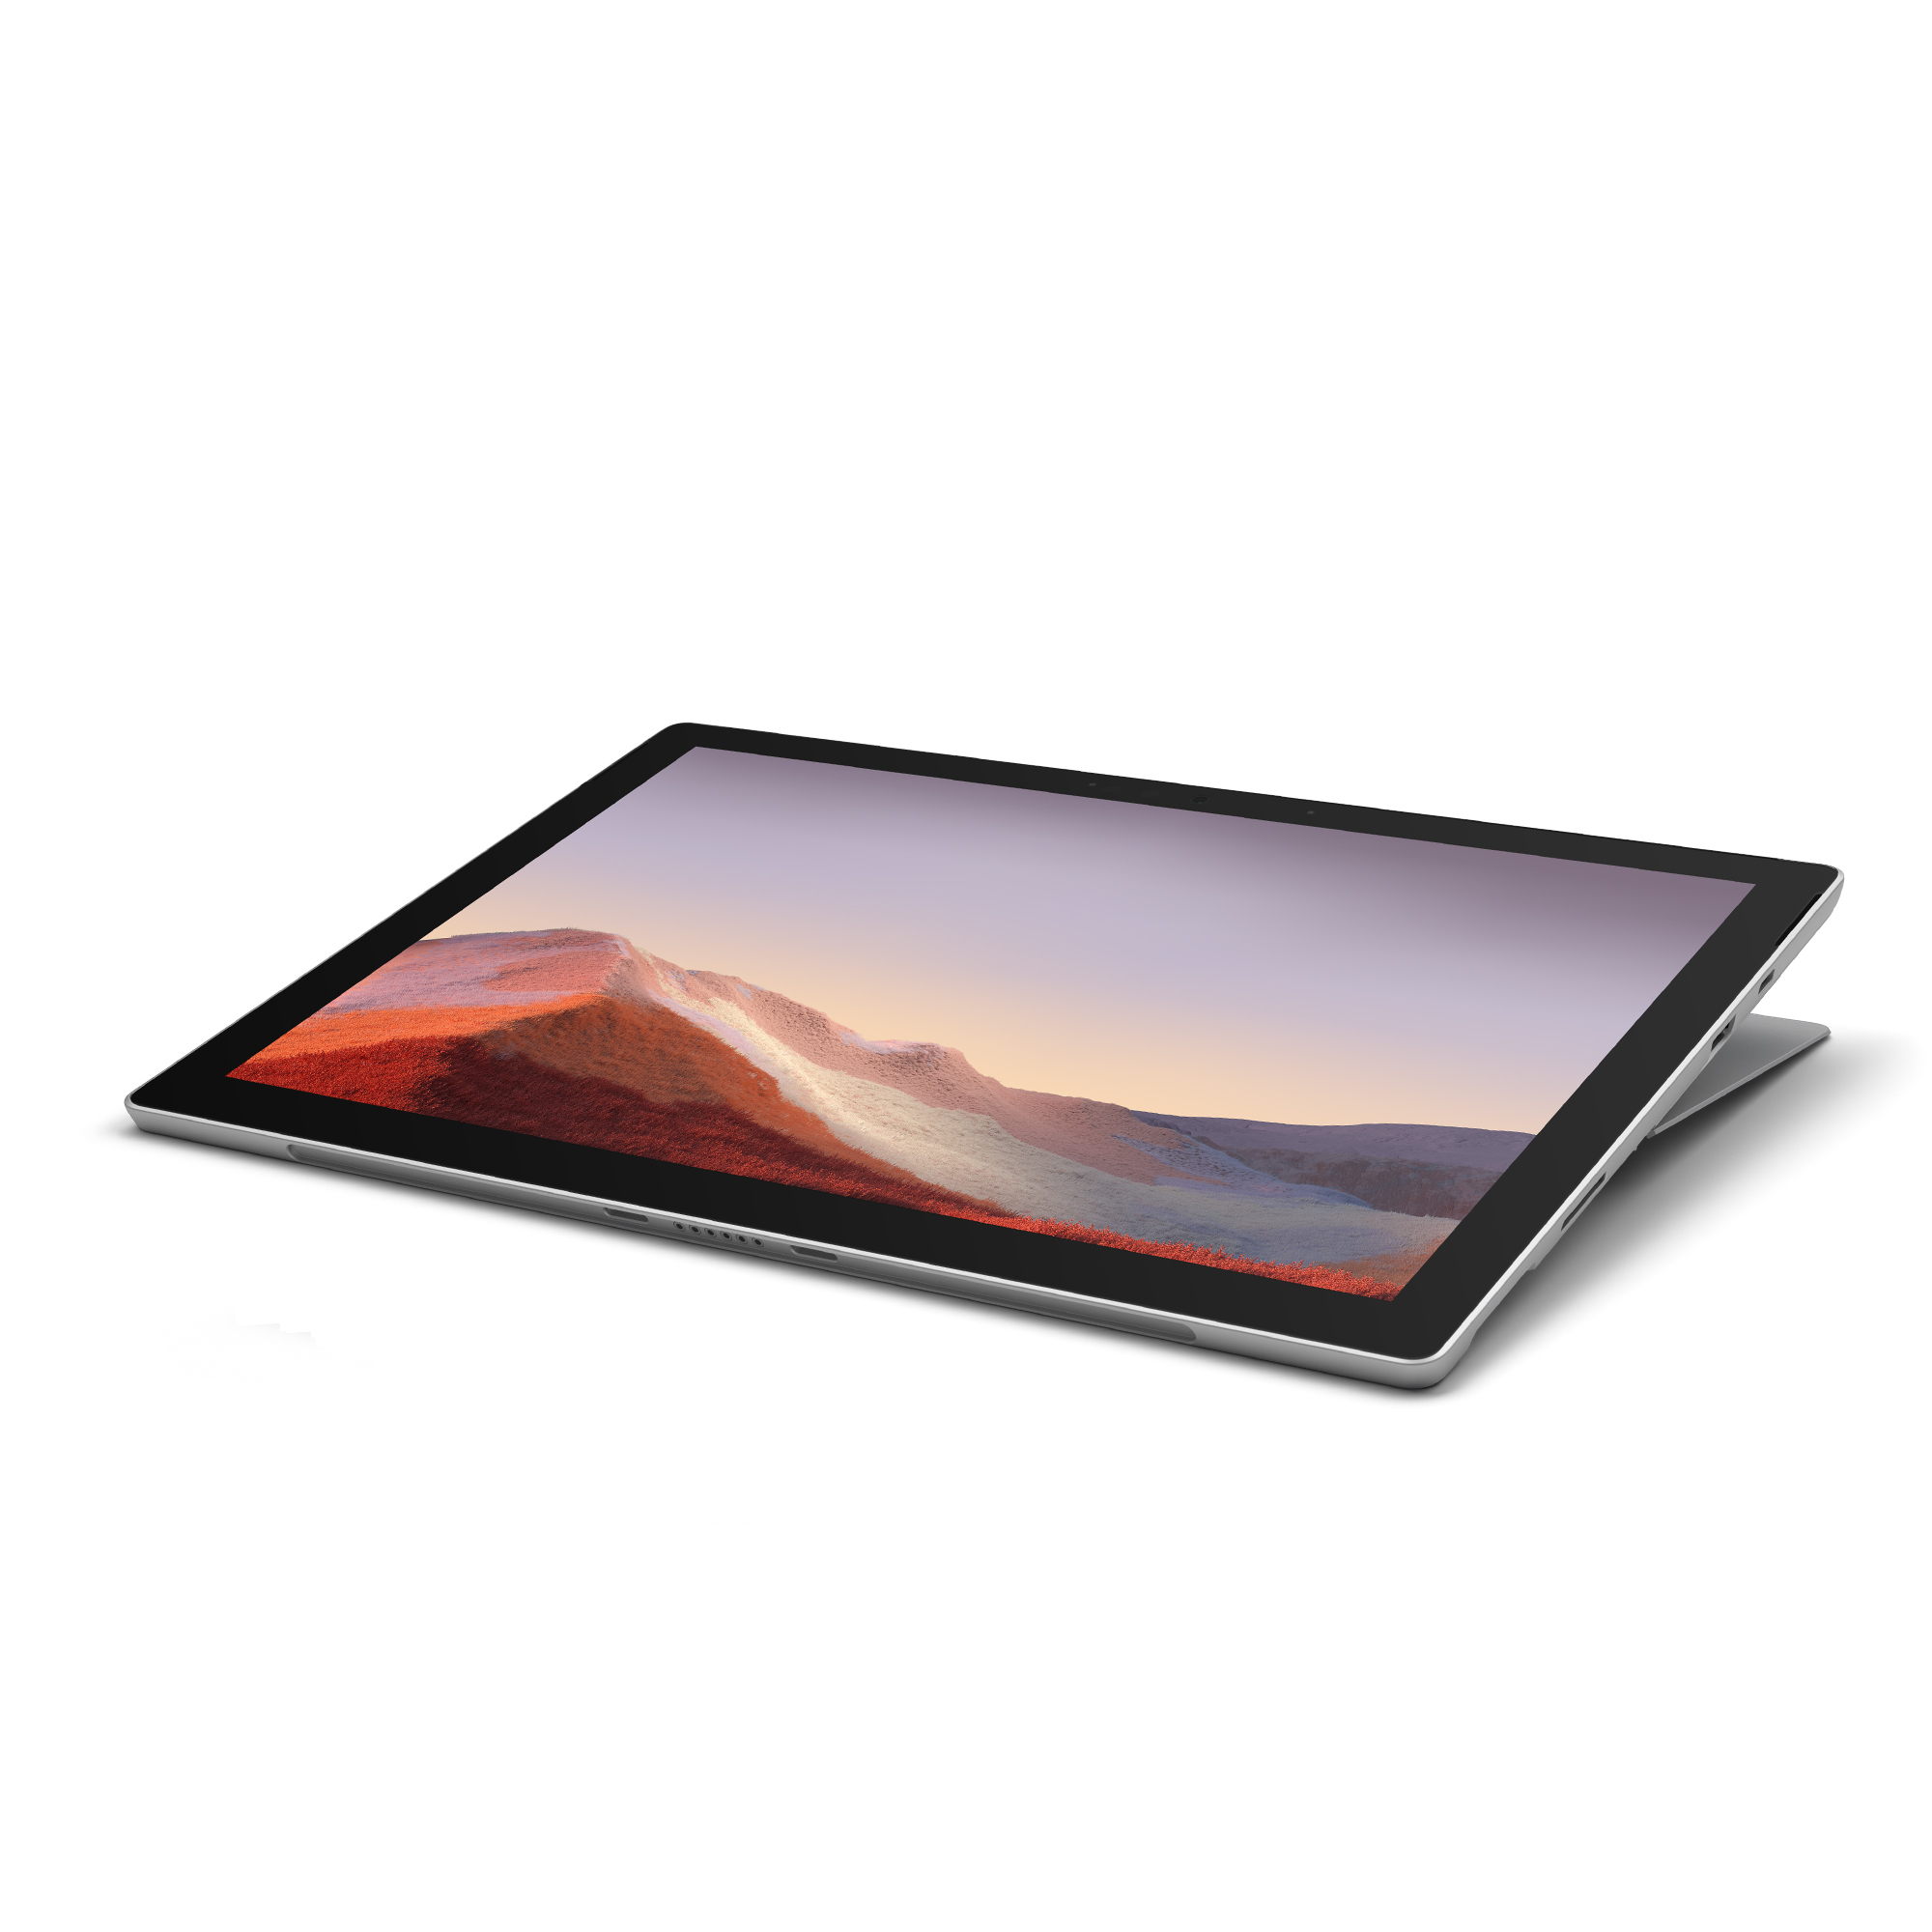 Microsoft Surface Pro 7 128 Gb 31 2 Cm 12 3 10th Gen Intel Core I3 4 Gb Wi Fi 6 802 11ax Windows 10 Pro Platinum 309 In Distributor Wholesale Stock For Resellers To Sell Stock In The Channel